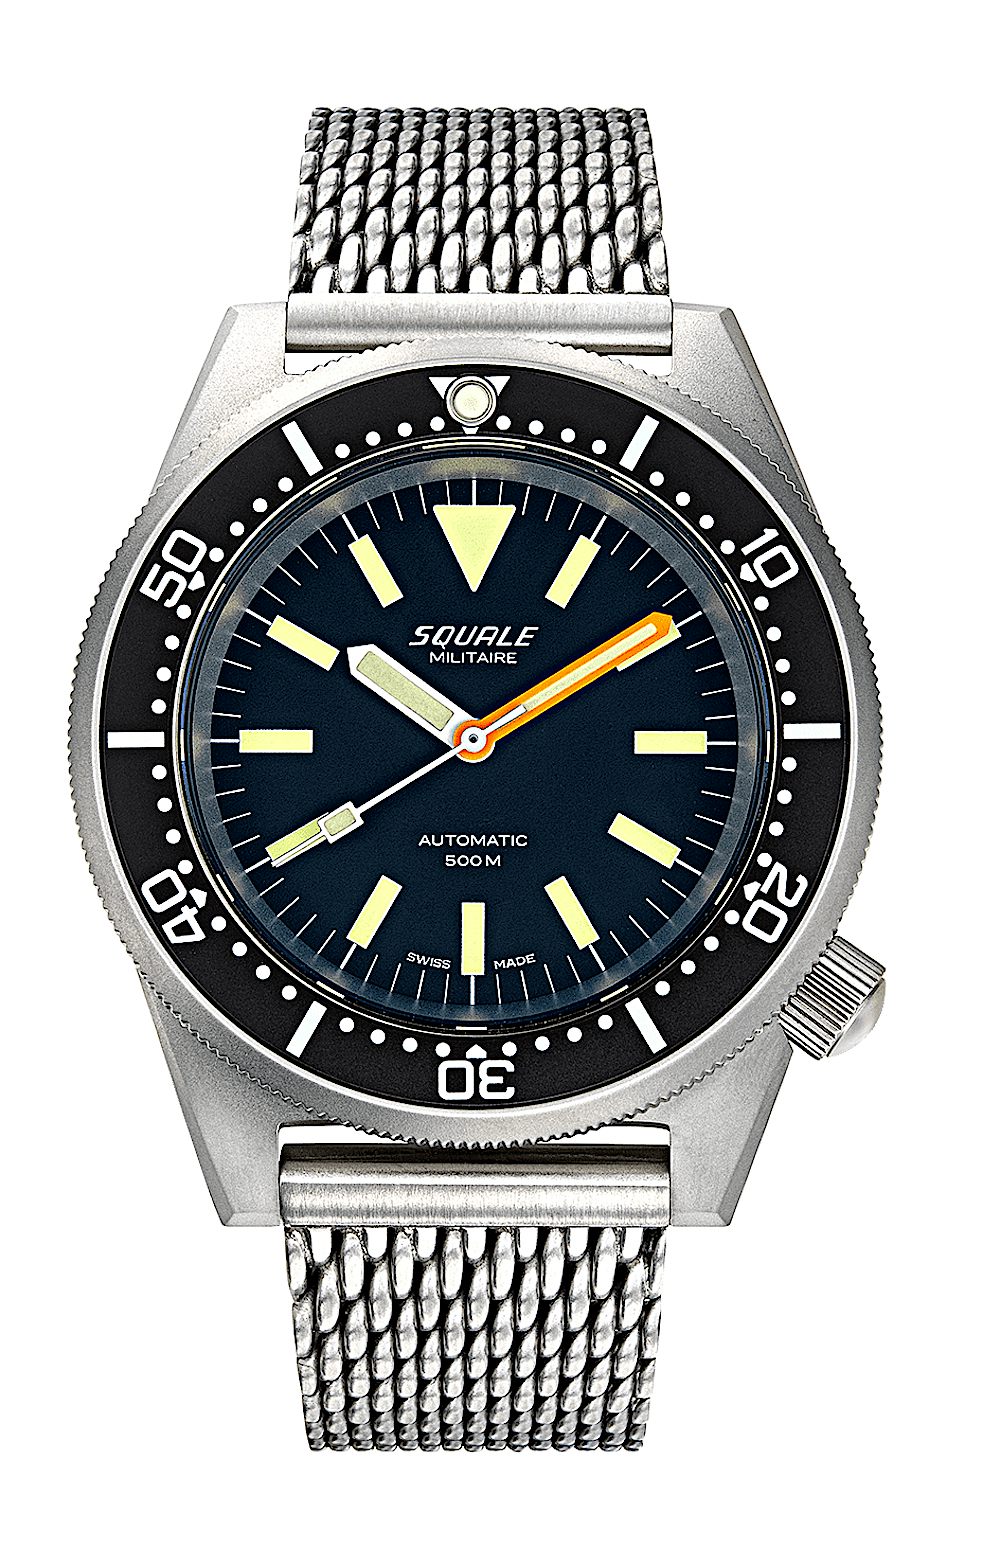 Squale Squale 1521